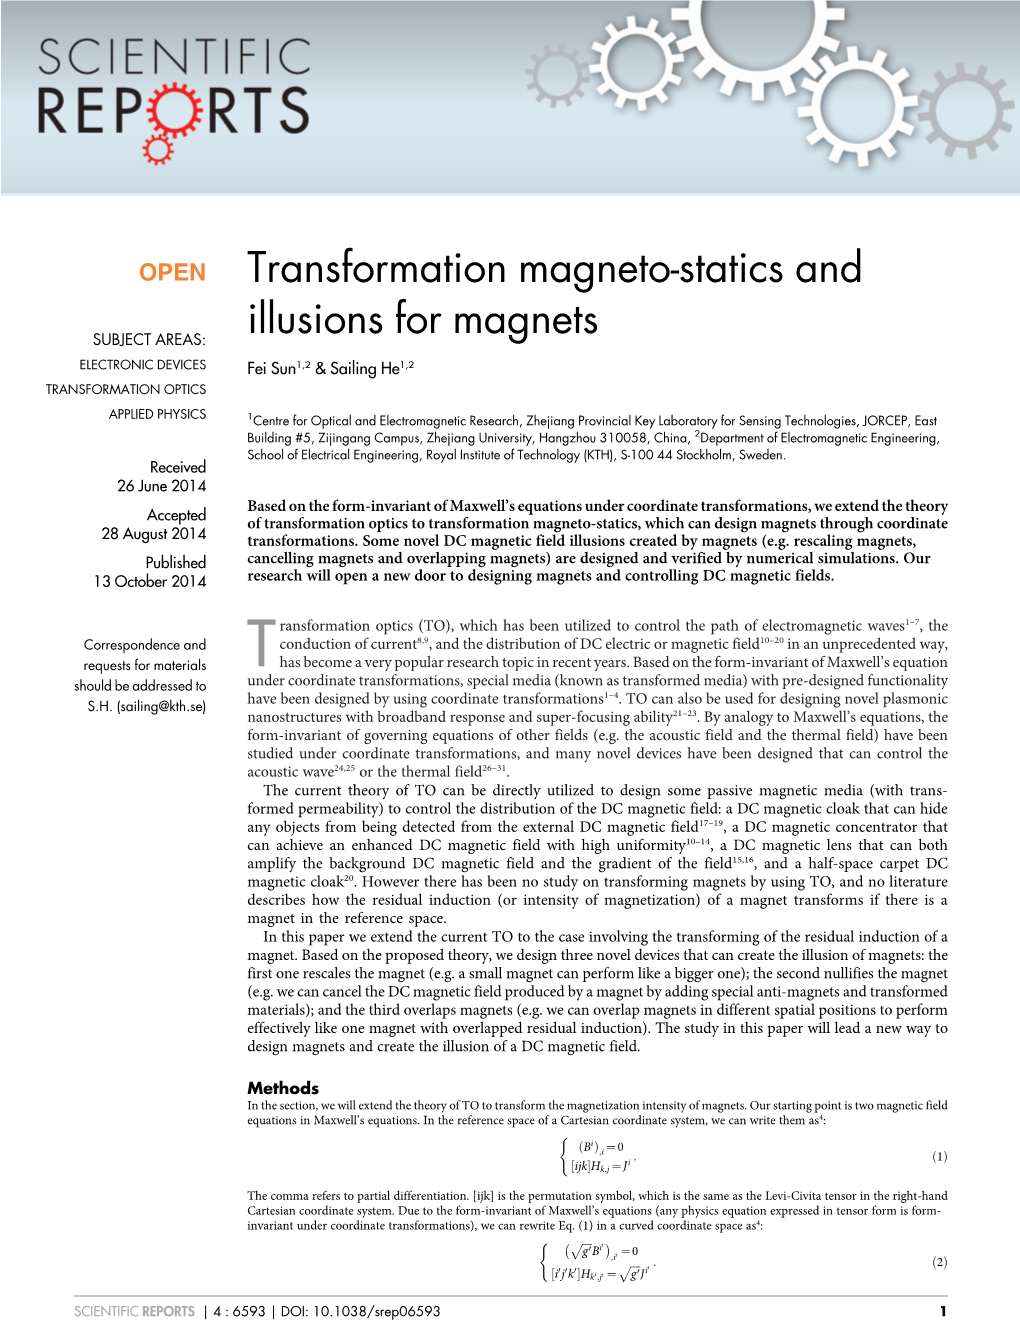 Transformation Magneto-Statics and Illusions for Magnets